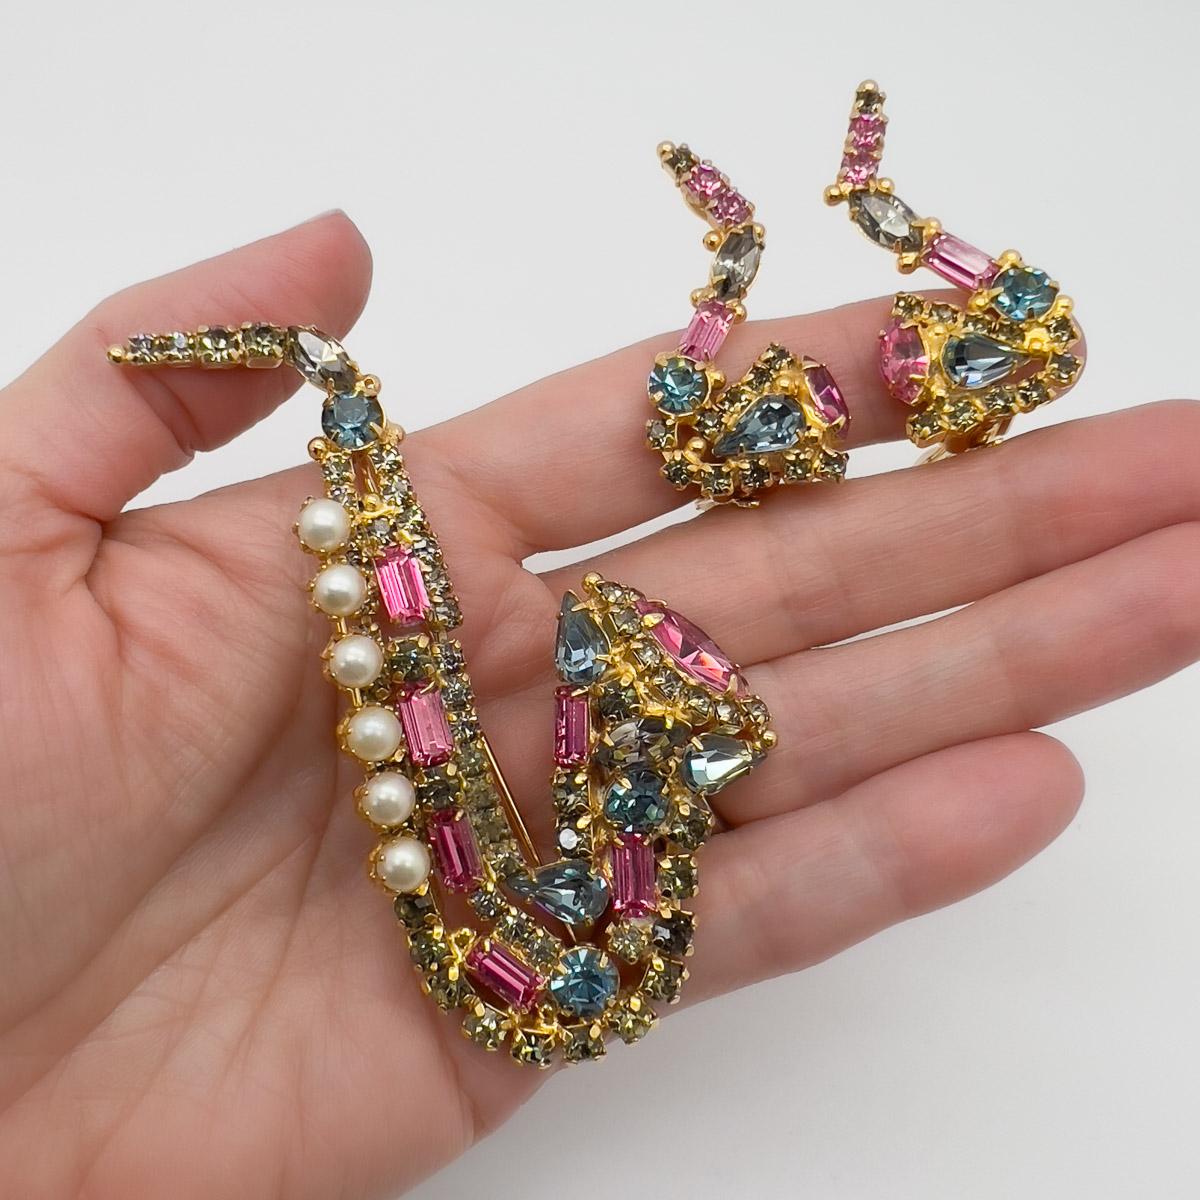 A Vintage Robert Saxophone Brooch with matching mini sax earrings. Mid century figurals, playful and fun and crafted to the highest quality by 'Original by Robert'. Breathtaking chic.
An American costume jewellery House, Original By Robert was found